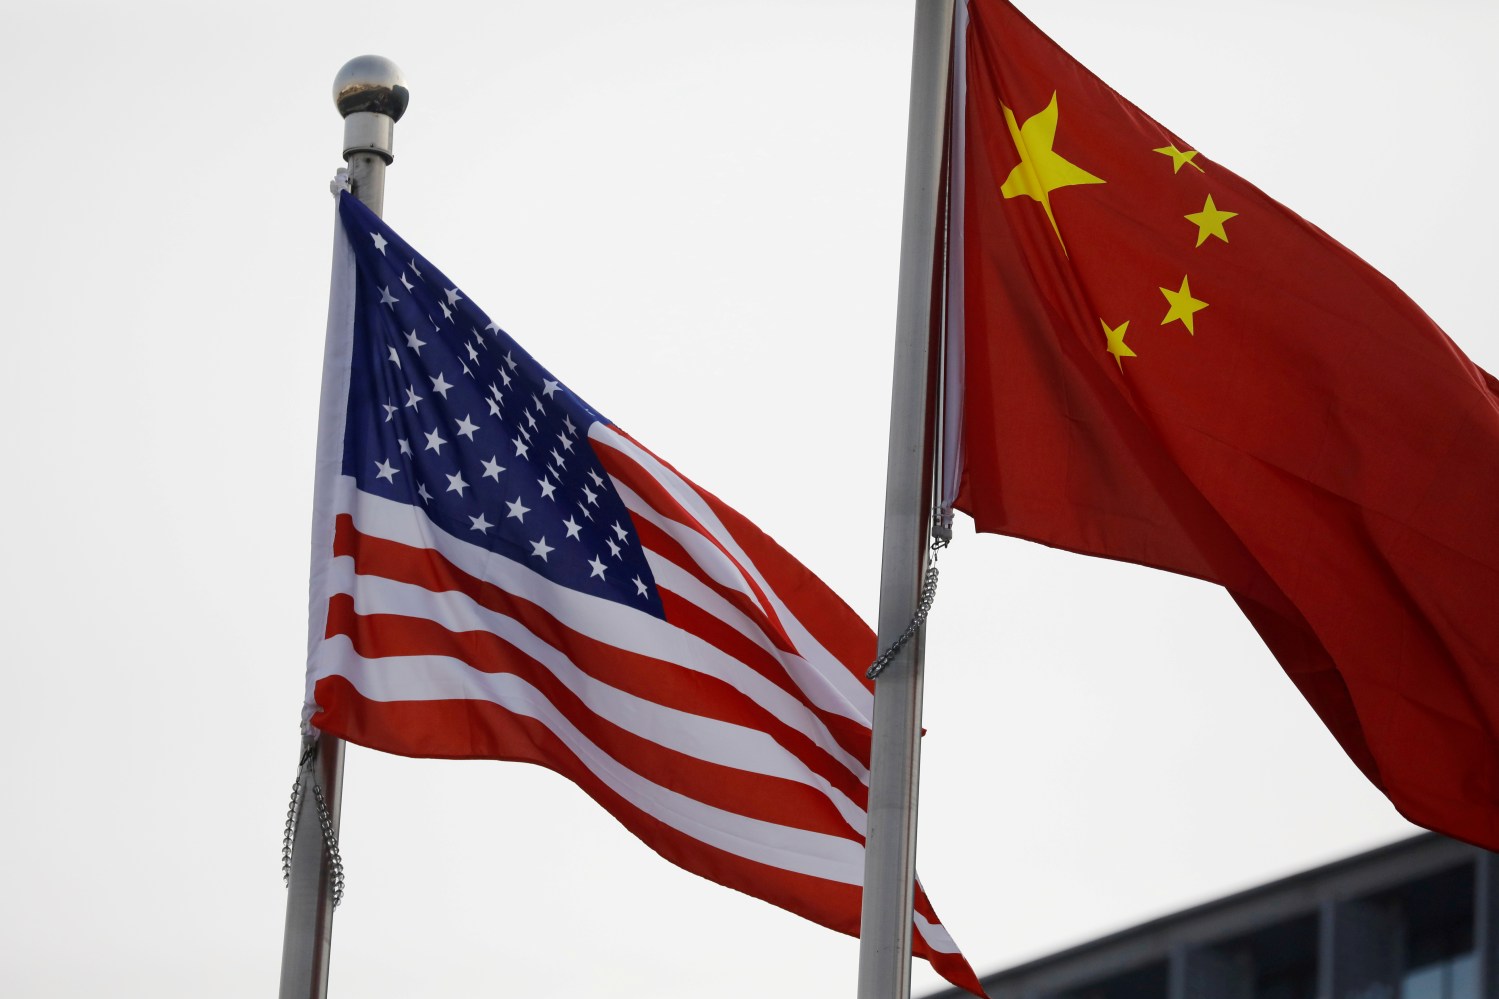 FILE PHOTO: Chinese and U.S. flags flutter outside the building of an American company in Beijing, China January 21, 2021. REUTERS/Tingshu Wang/File Photo/File Photo